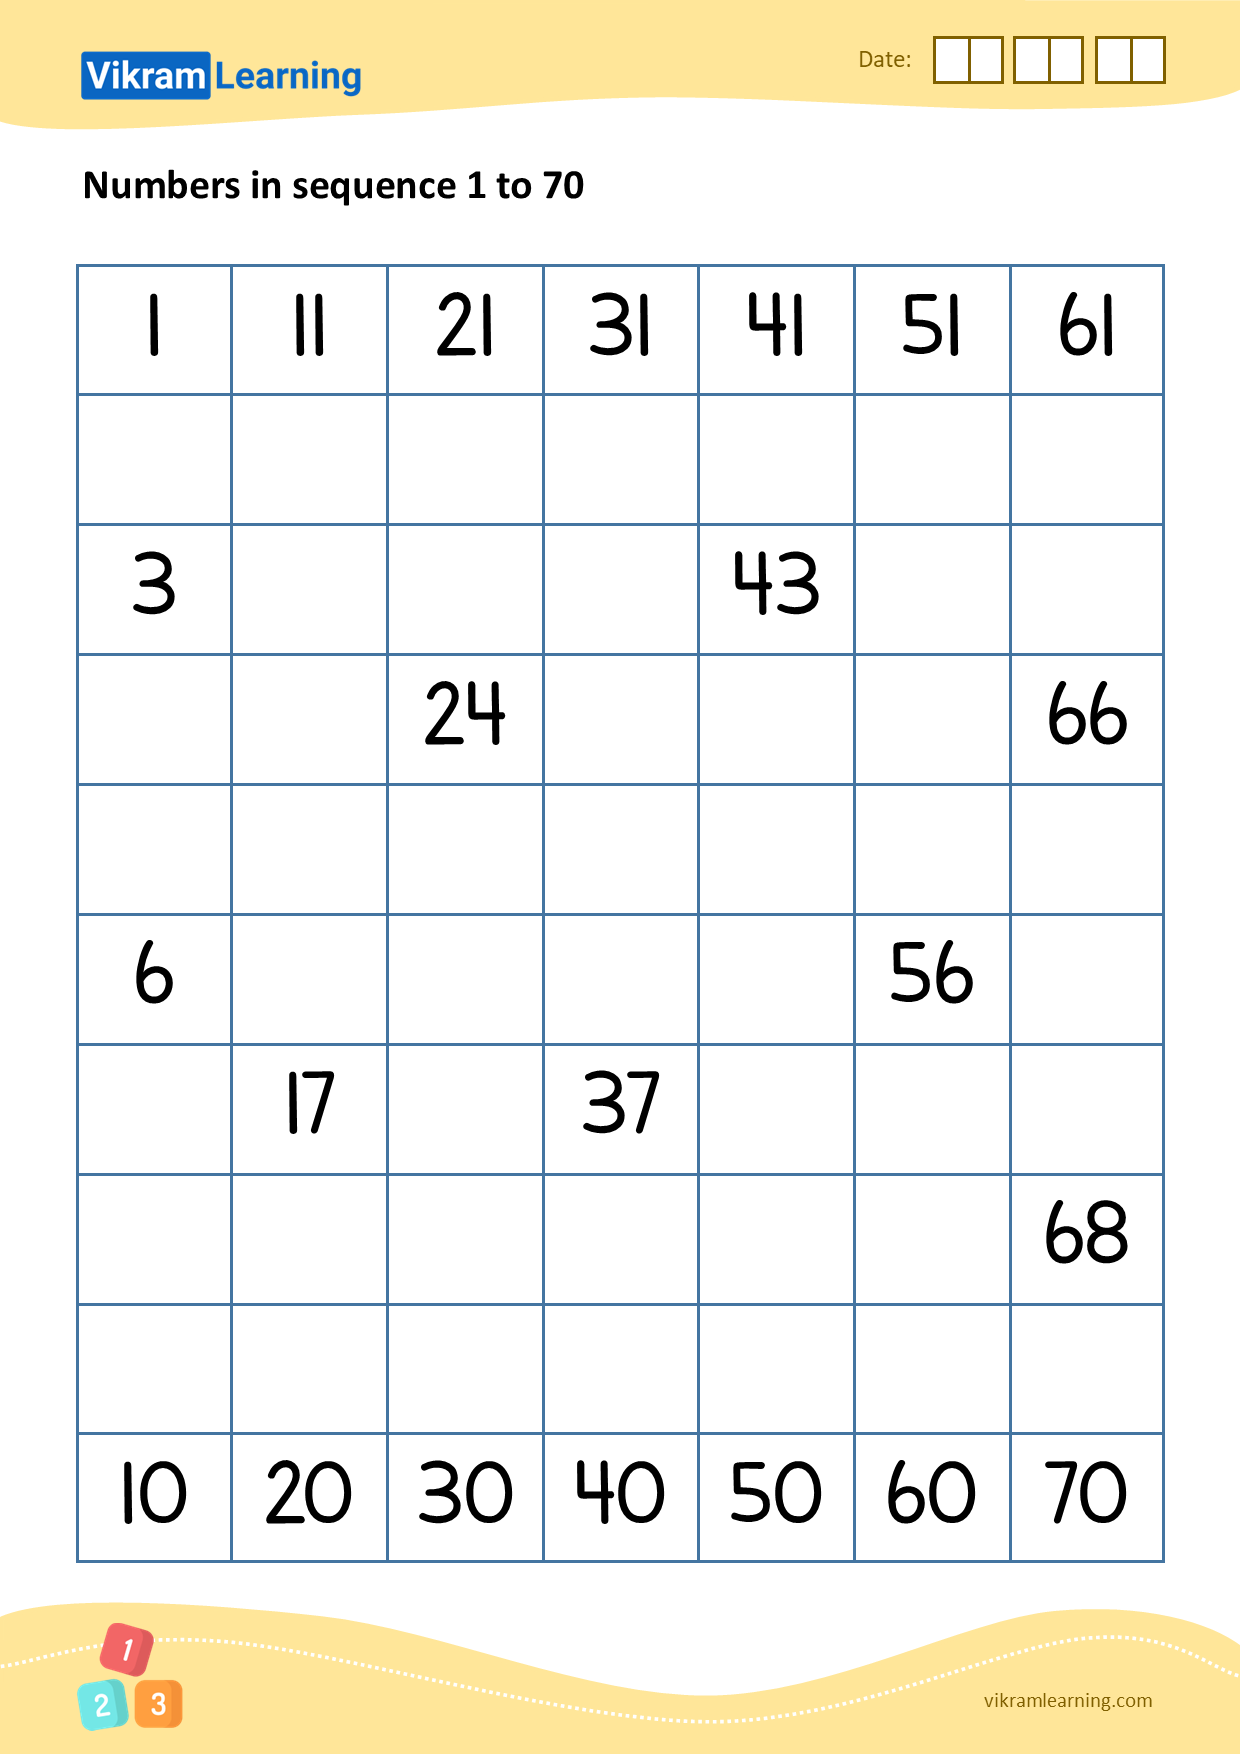 Download 04 - numbers in sequence 1 to 70 worksheets